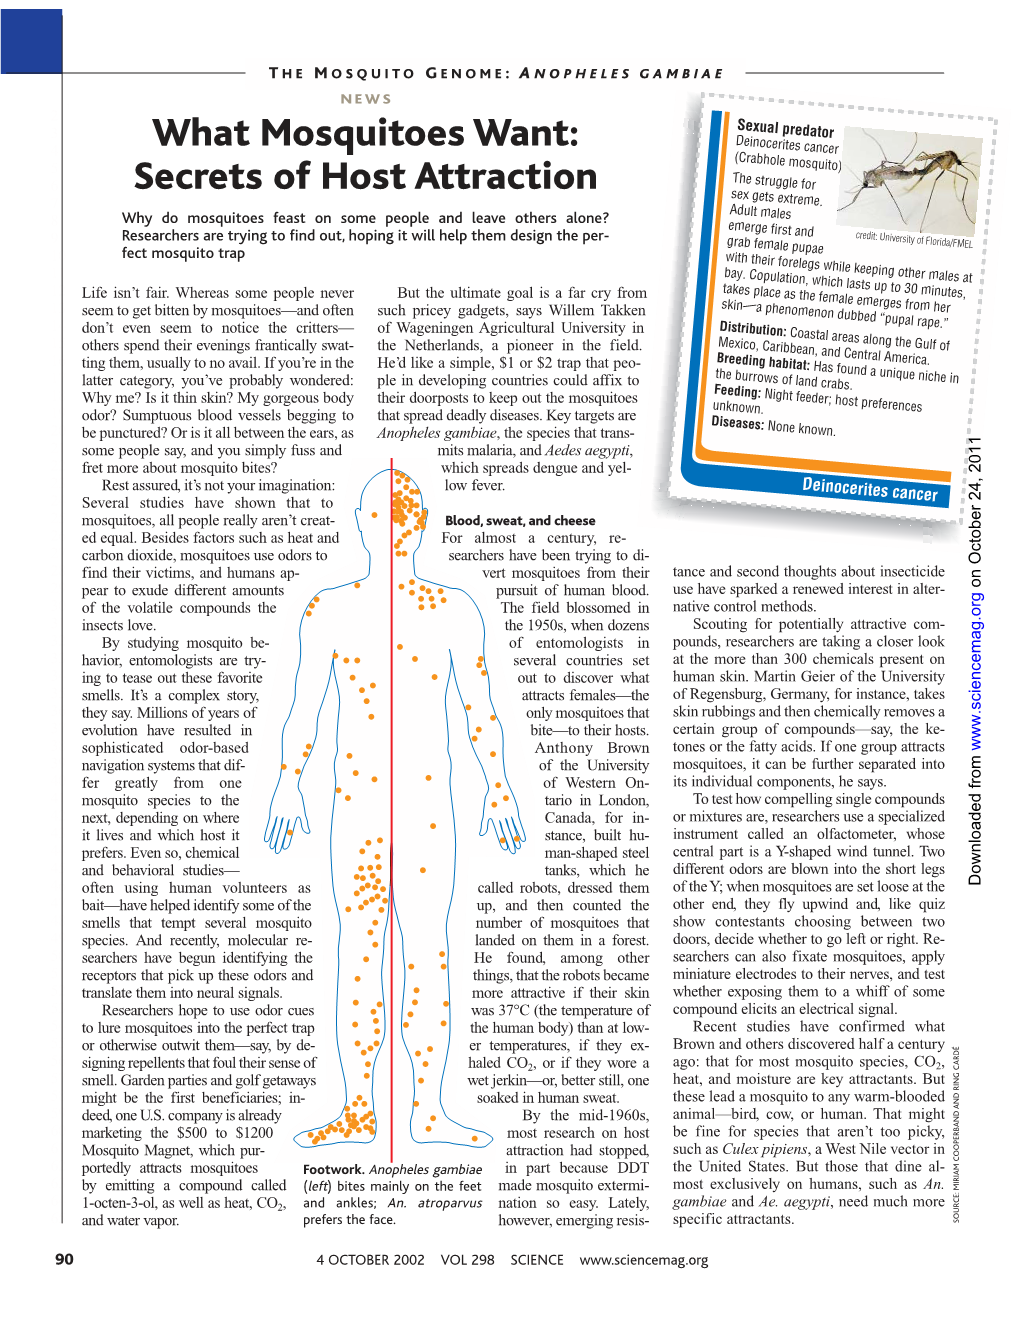 What Mosquitoes Want: Secrets of Host Attraction